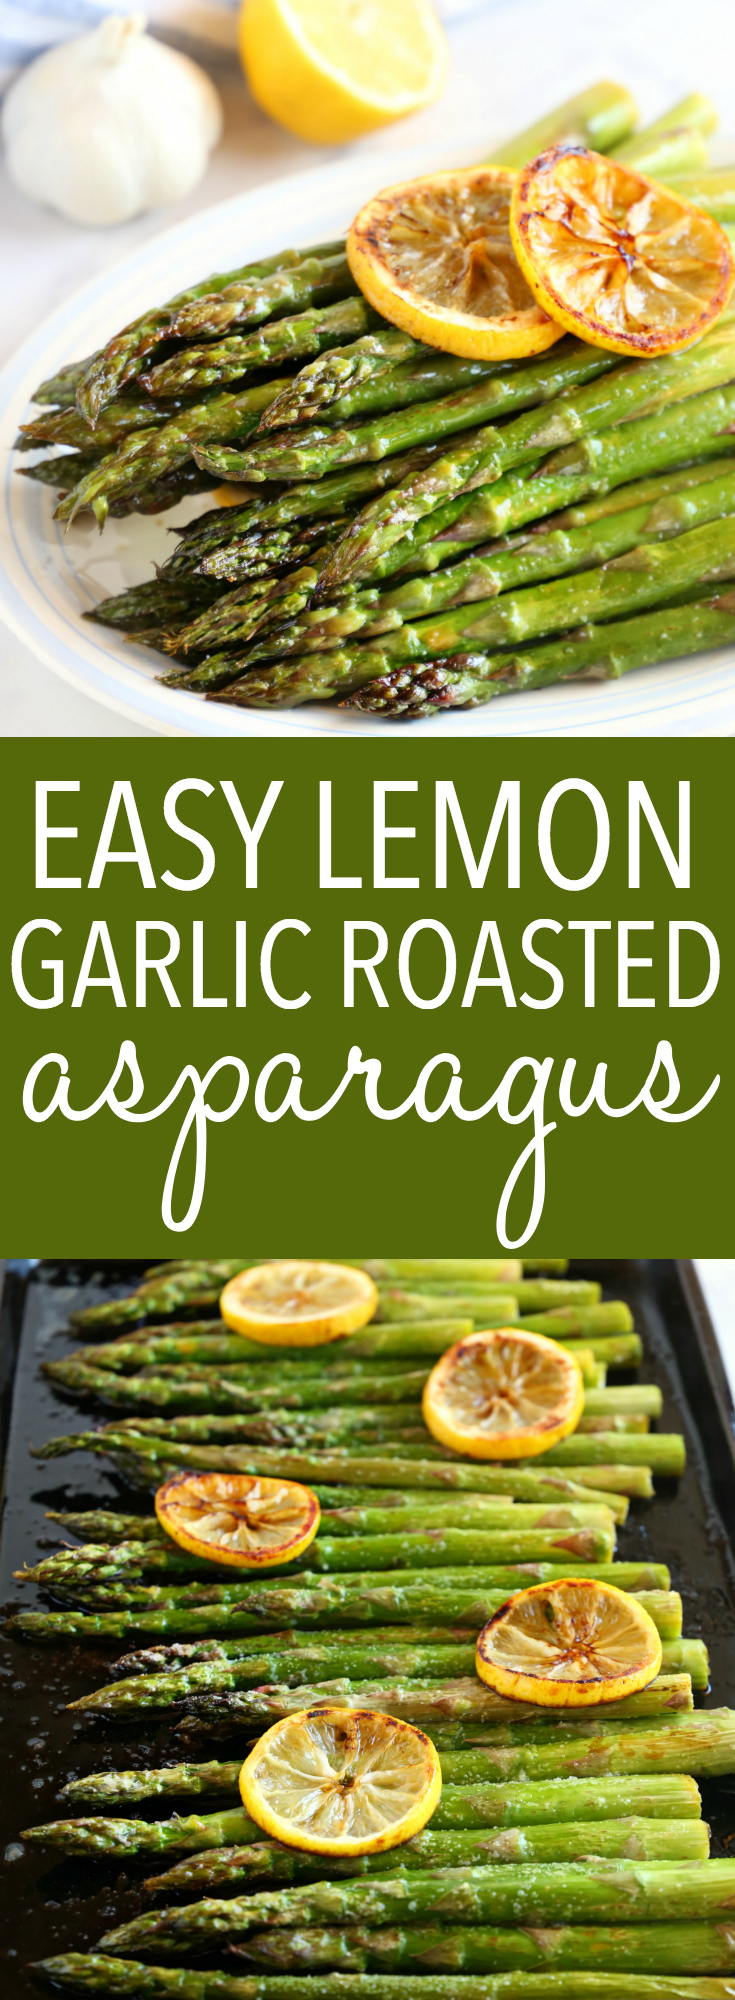 This Lemon Garlic Roasted Asparagus is a super easy and totally delicious side dish for spring and summer! Only a few ingredients and 15 minutes stand between you and this fresh, flavourful dish! Recipe from thebusybaker.ca! #asparagusrecipe #roastedasparagus #lemongarlicasparagus #easyasparagusrecipe #garlicasparagus via @busybakerblog